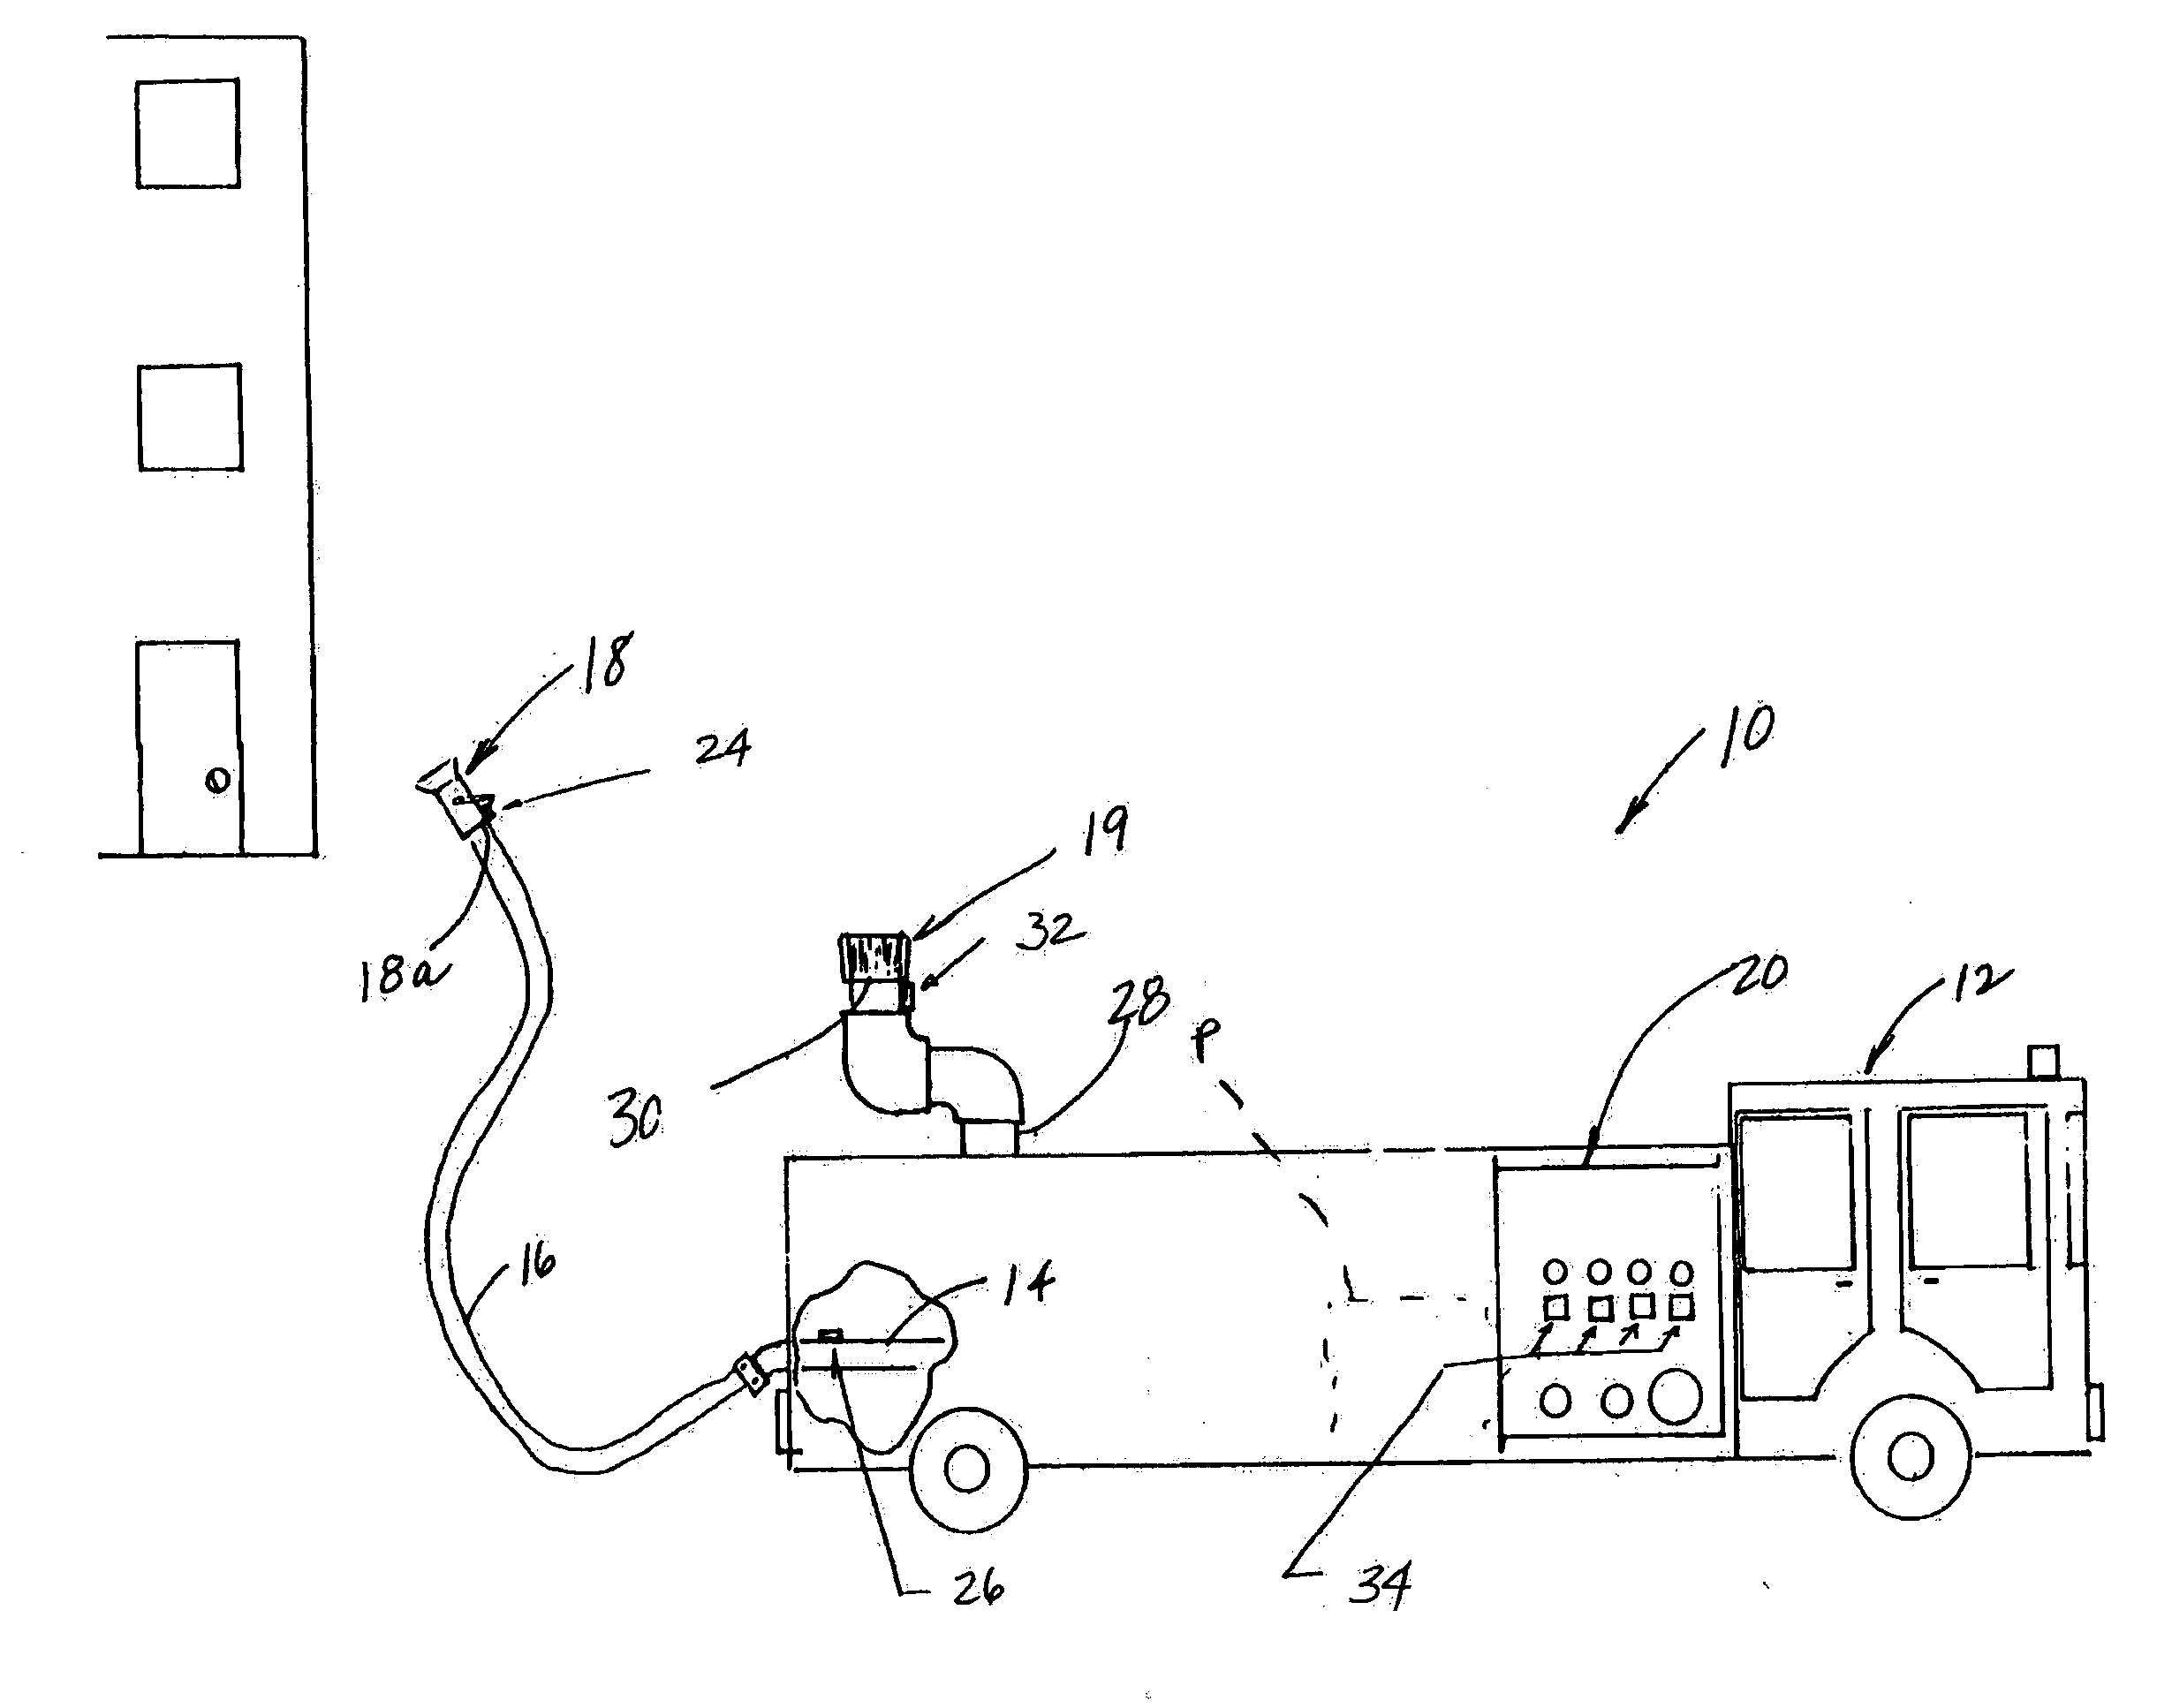 Firefighting fluid delivery system